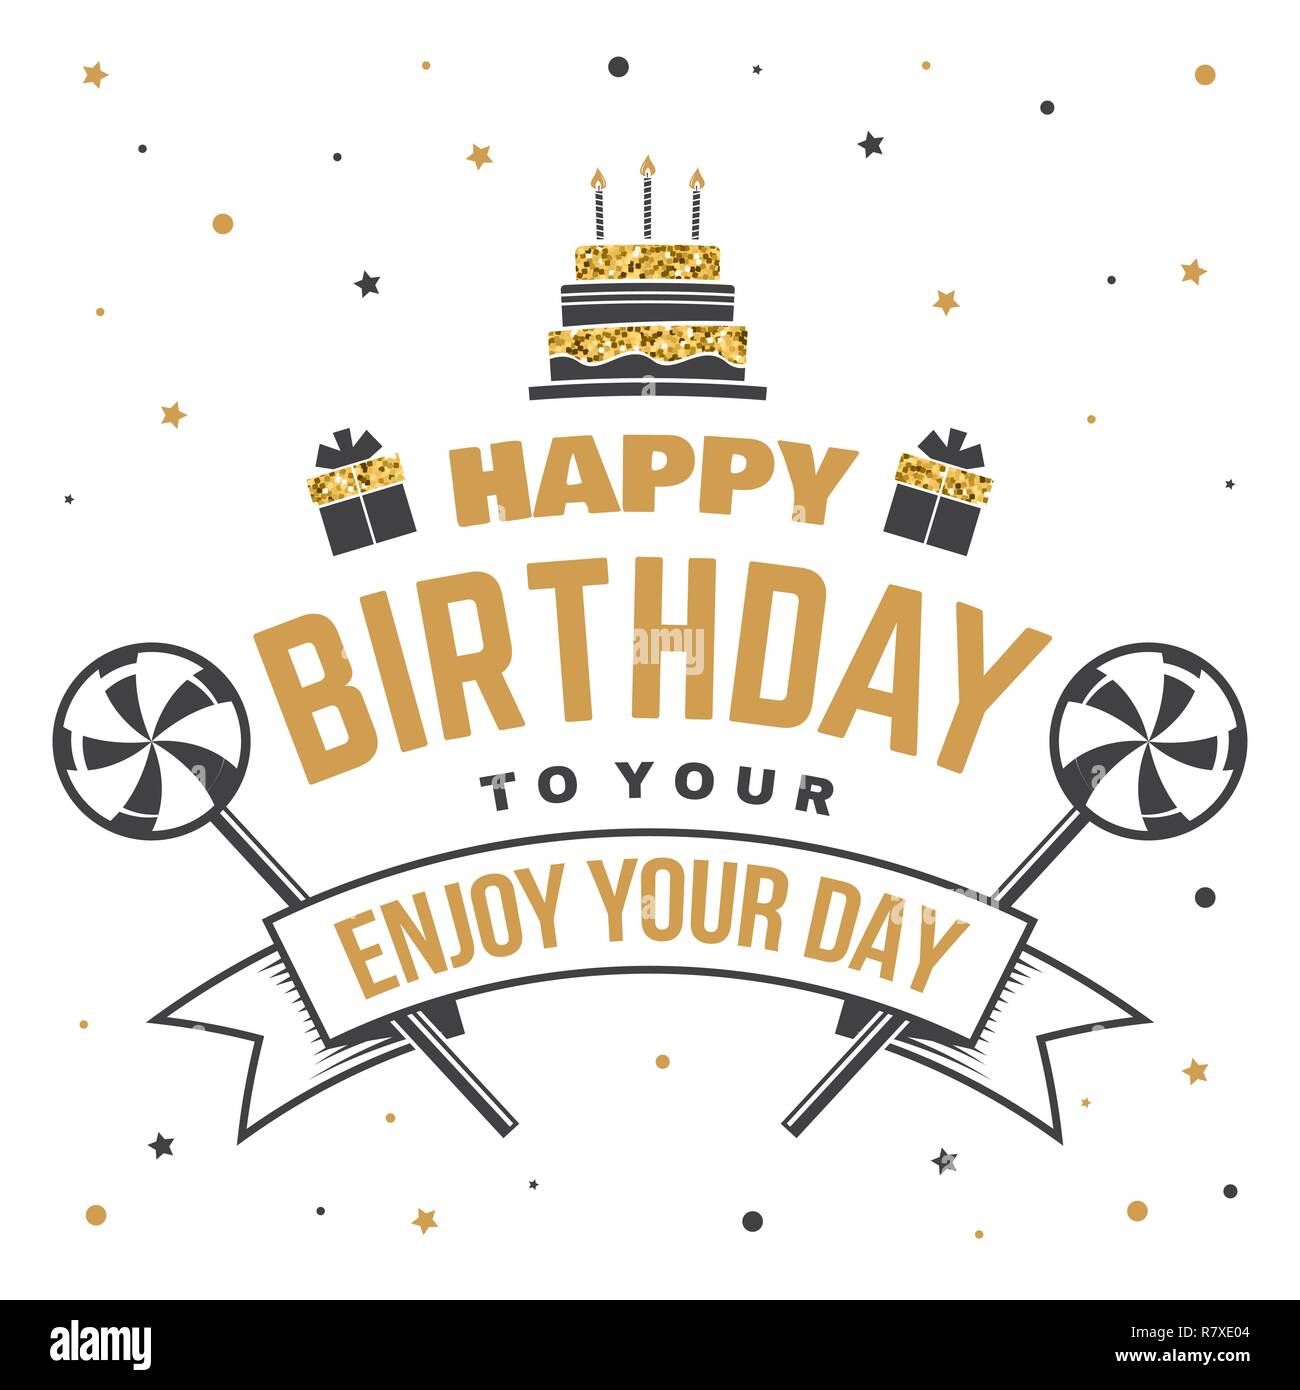 Happy Birthday to you. May all your dreams and wishes come true. Stamp, badge, card with birthday cake with candles and candy. Vector. Design for birthday celebration emblem in retro style Stock Vector